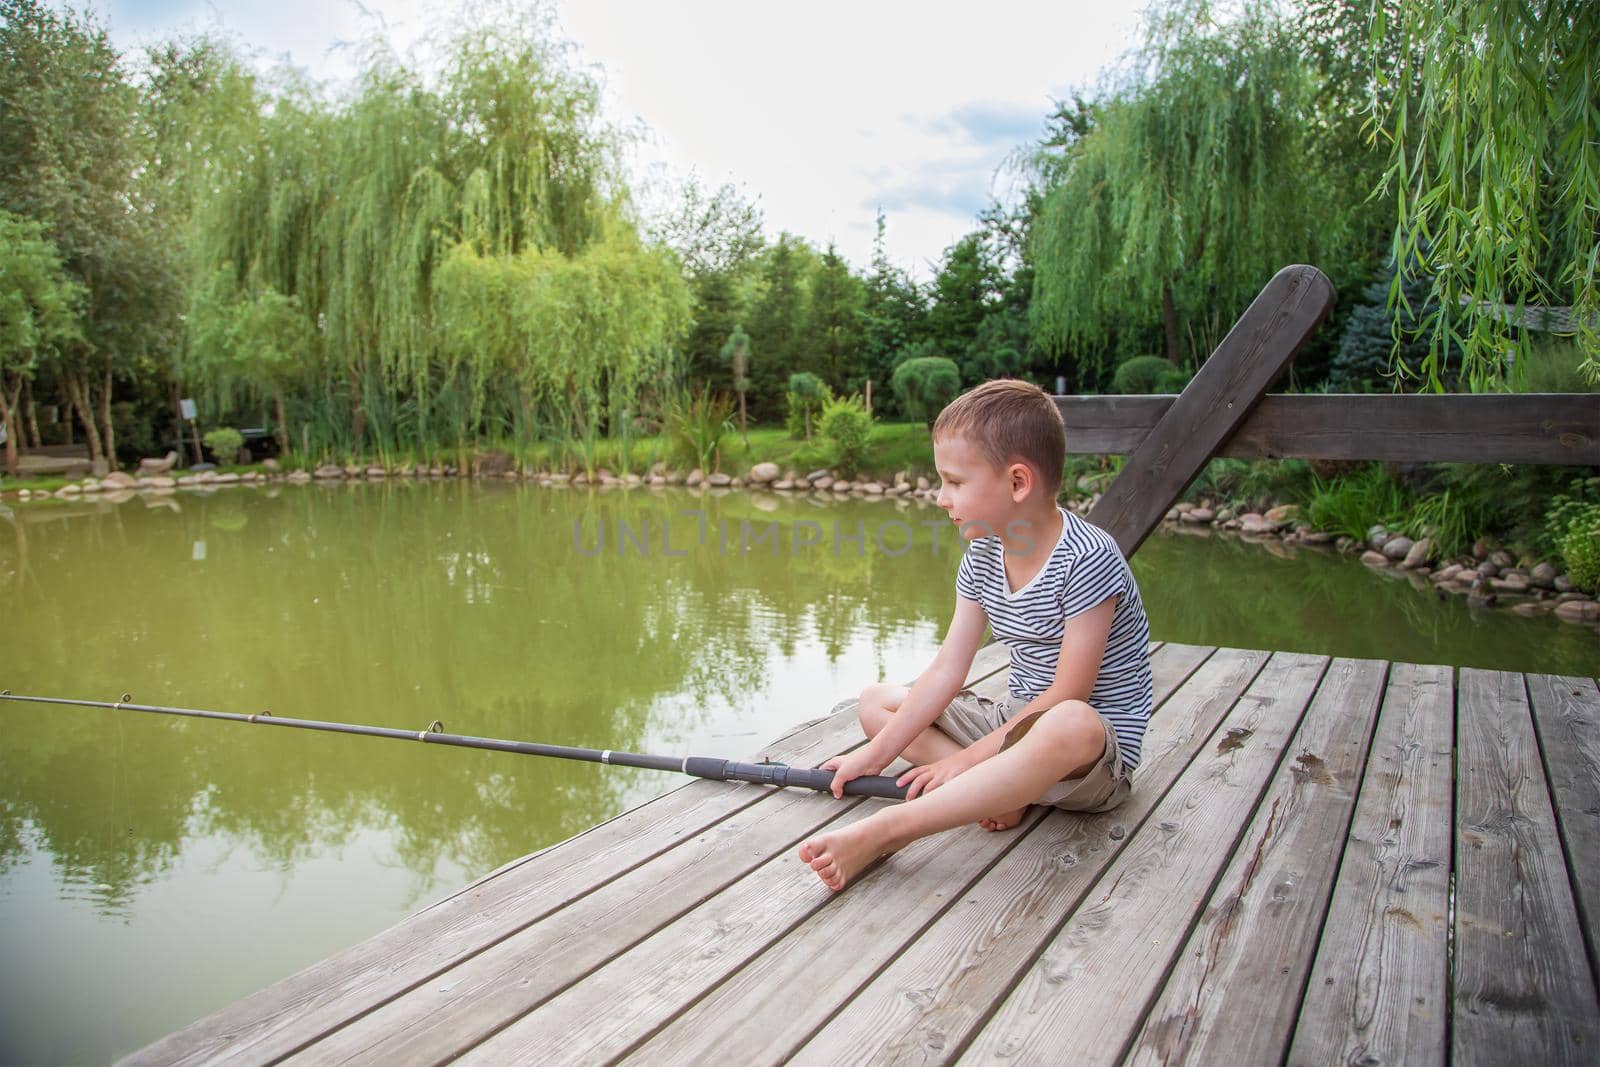 on the shore near the river on sunny day, sad boy sits and catches fish. The child is dressed in a striped T-shirt and shorts, sits on a wooden pier and looks into the distance, holding a fishing rod